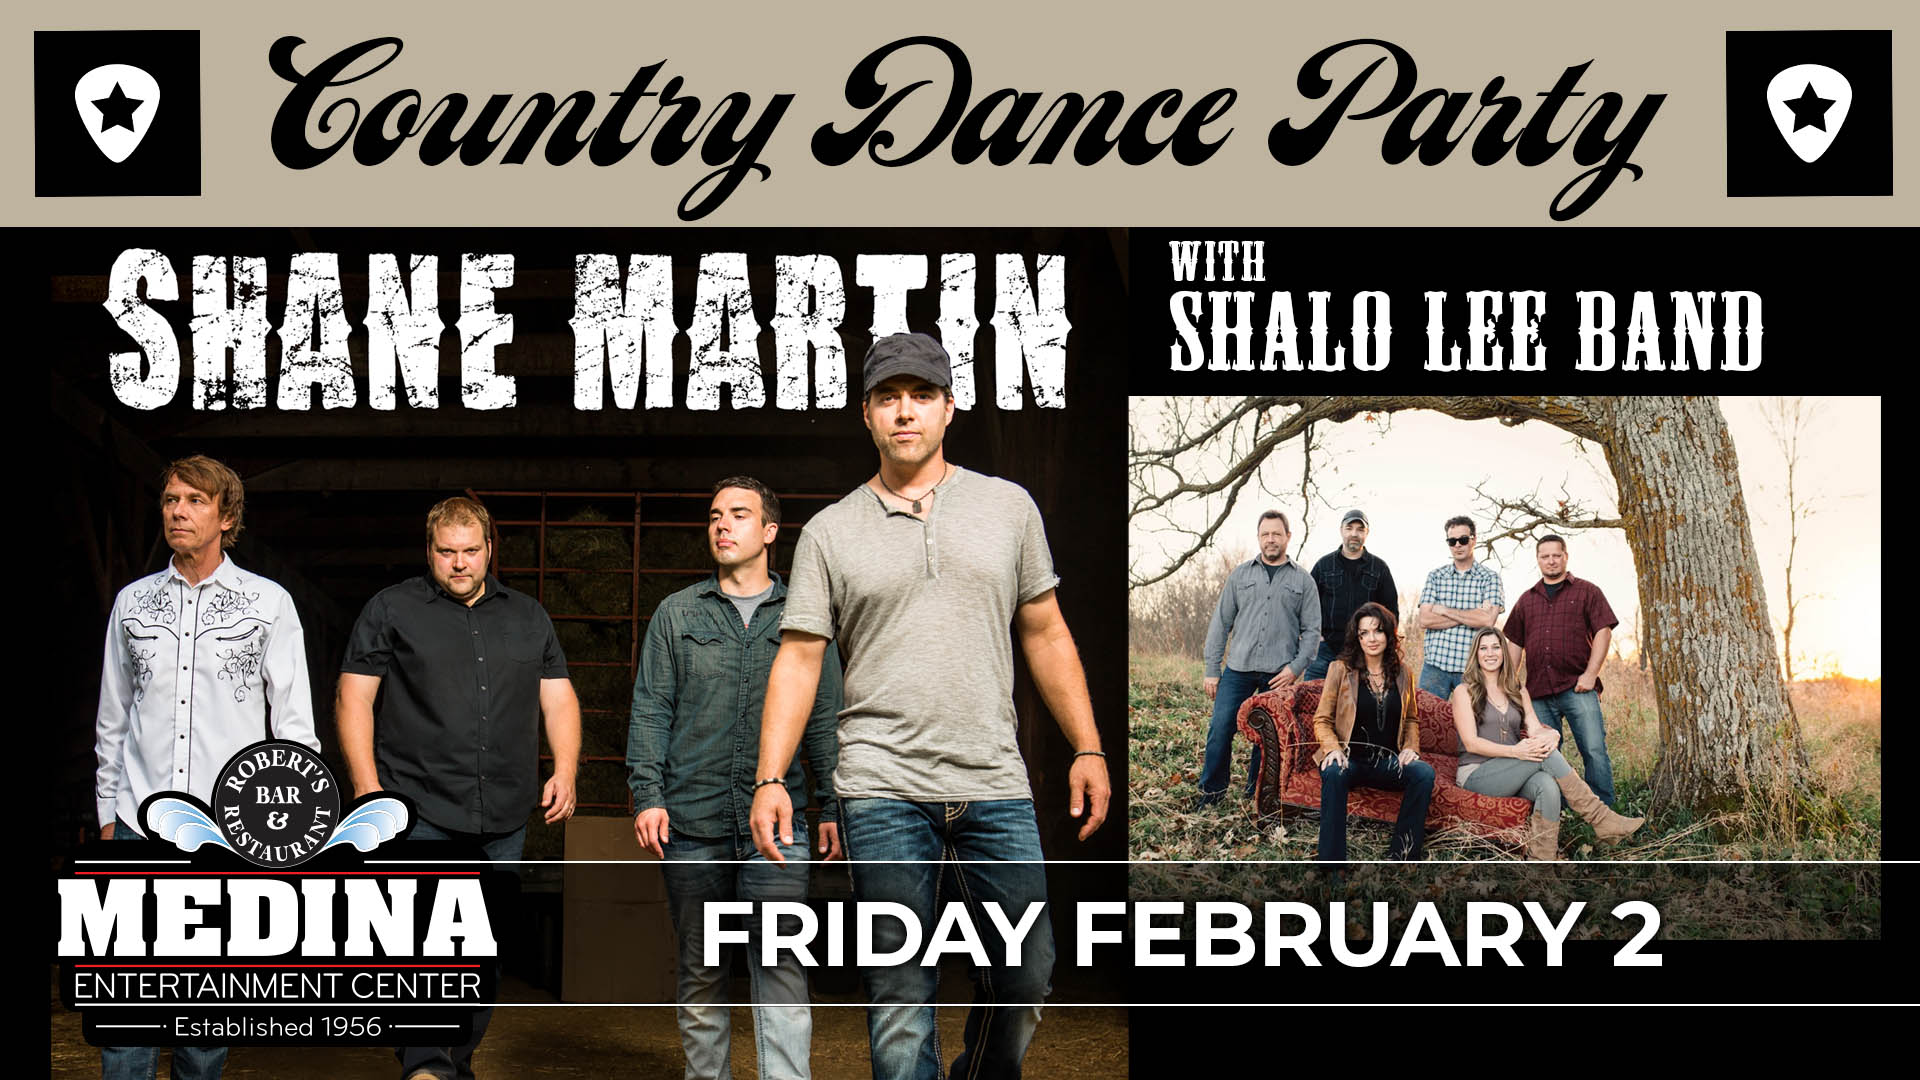 Shane Martin with Shalo Lee Medina Entertainment Center Friday, February 2nd, 2024 Doors: 7:00PM | Music: 8:00PM | 21+ Tickets on-sale Friday, January 12 at 11AM $17 Advance / $22 Day of Show plus applicable fees